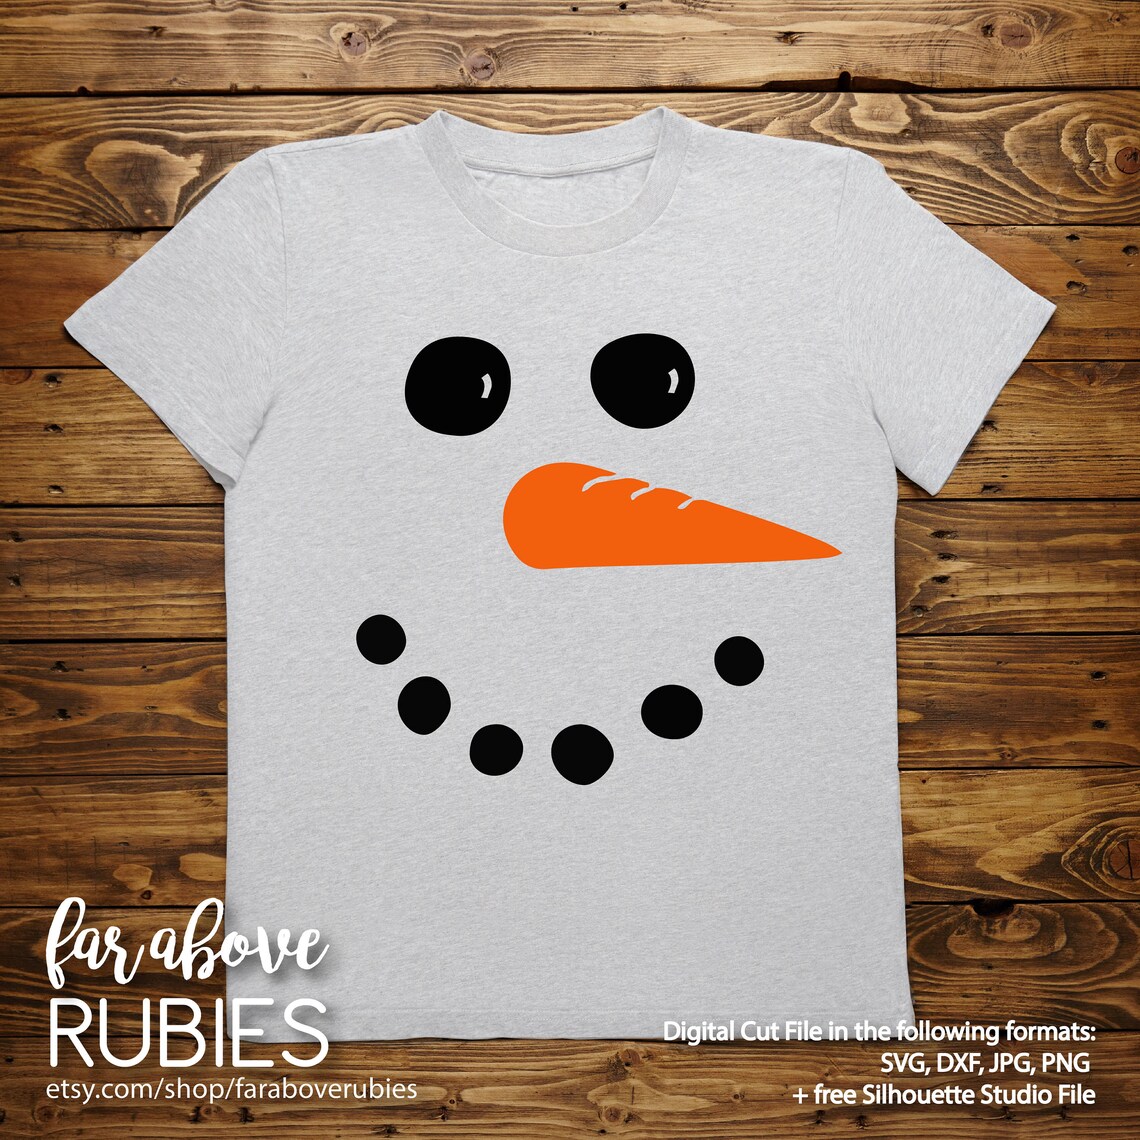 Download Snowman Face with Carrot Nose SVG EPS dxf png jpg digital ...